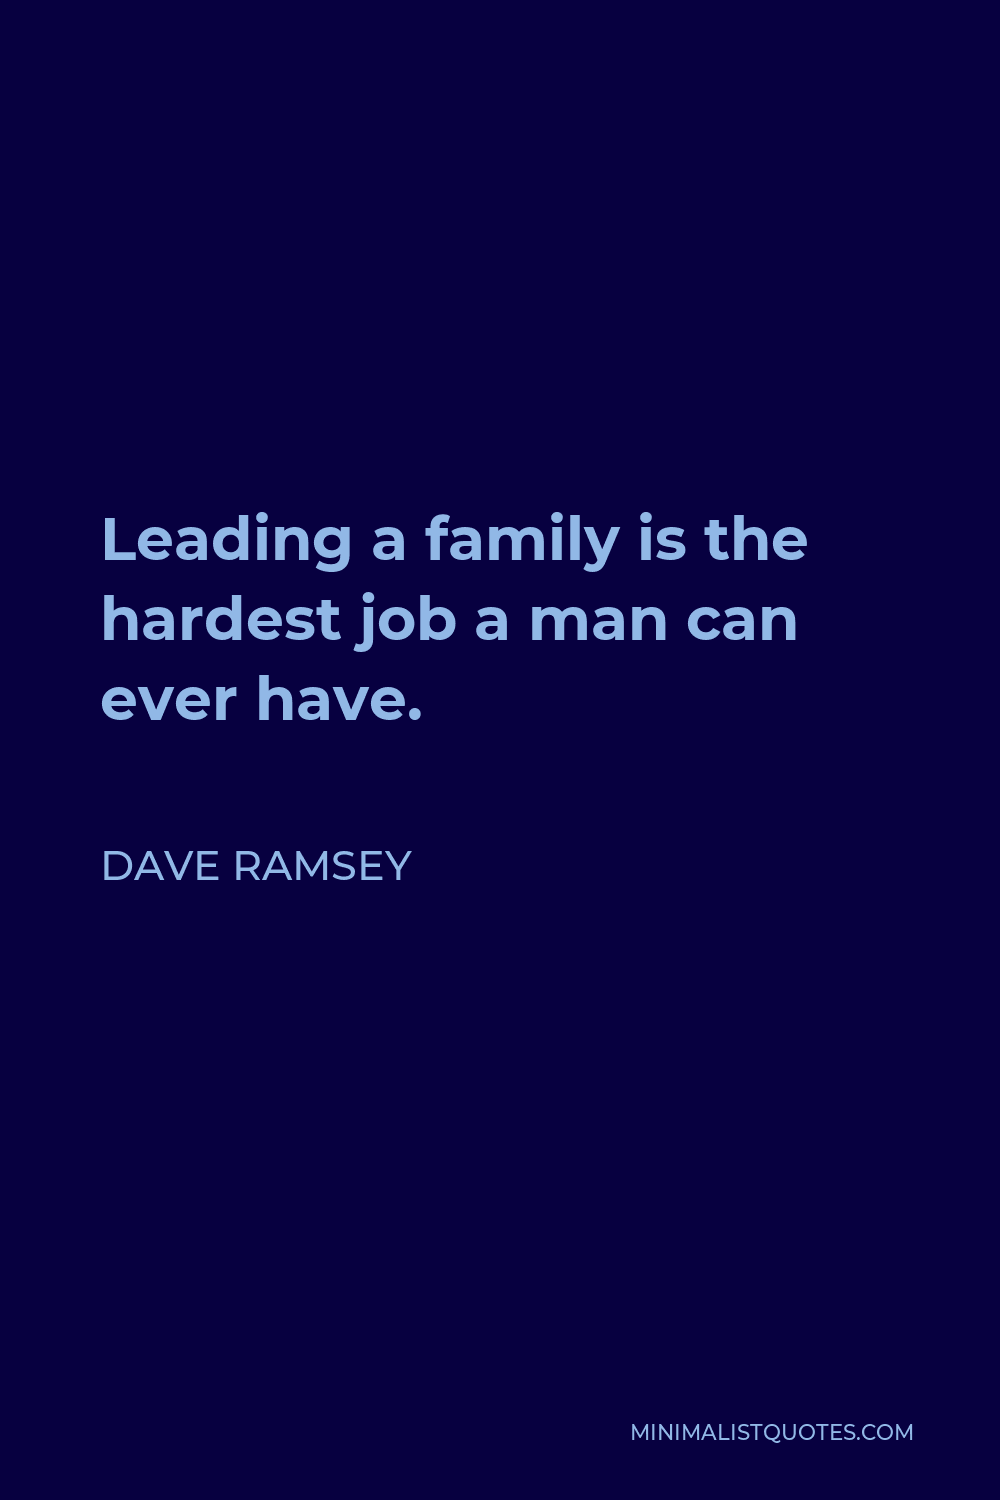 Dave Ramsey Quote - Leading a family is the hardest job a man can ever have.